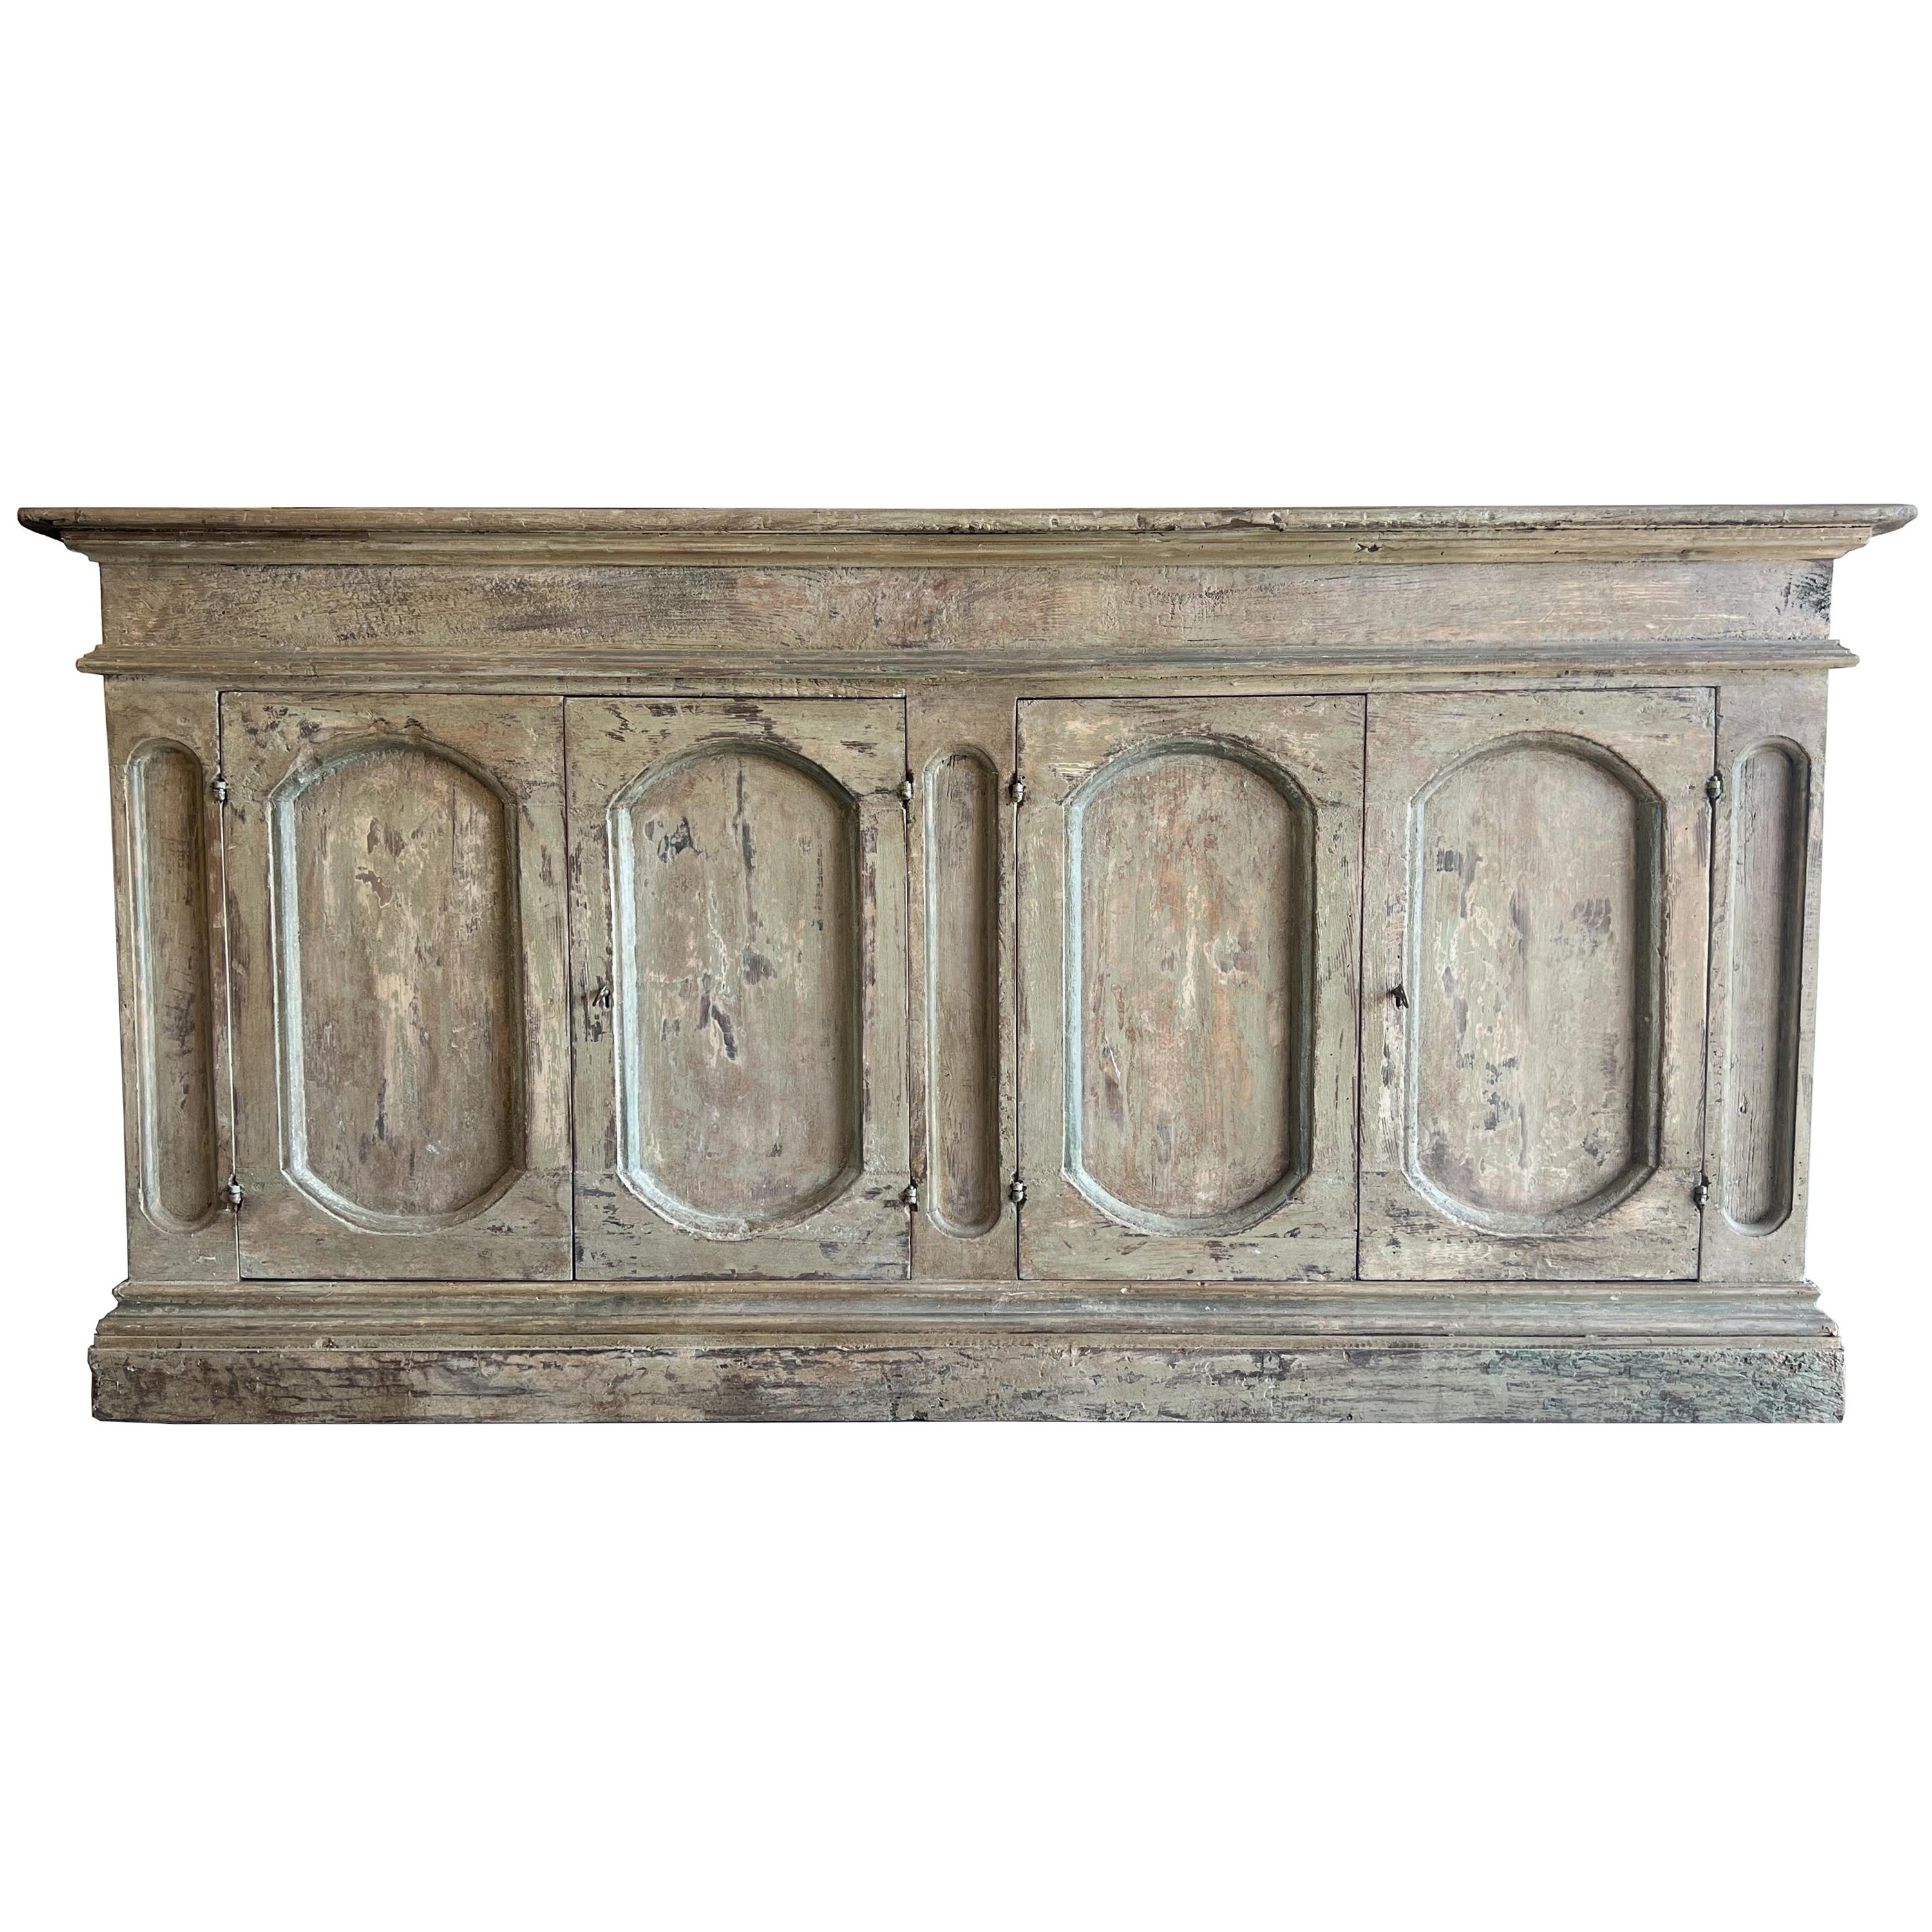 Perugia - 18th Century Style Italian 4-Door Painted and Distressed Credenza